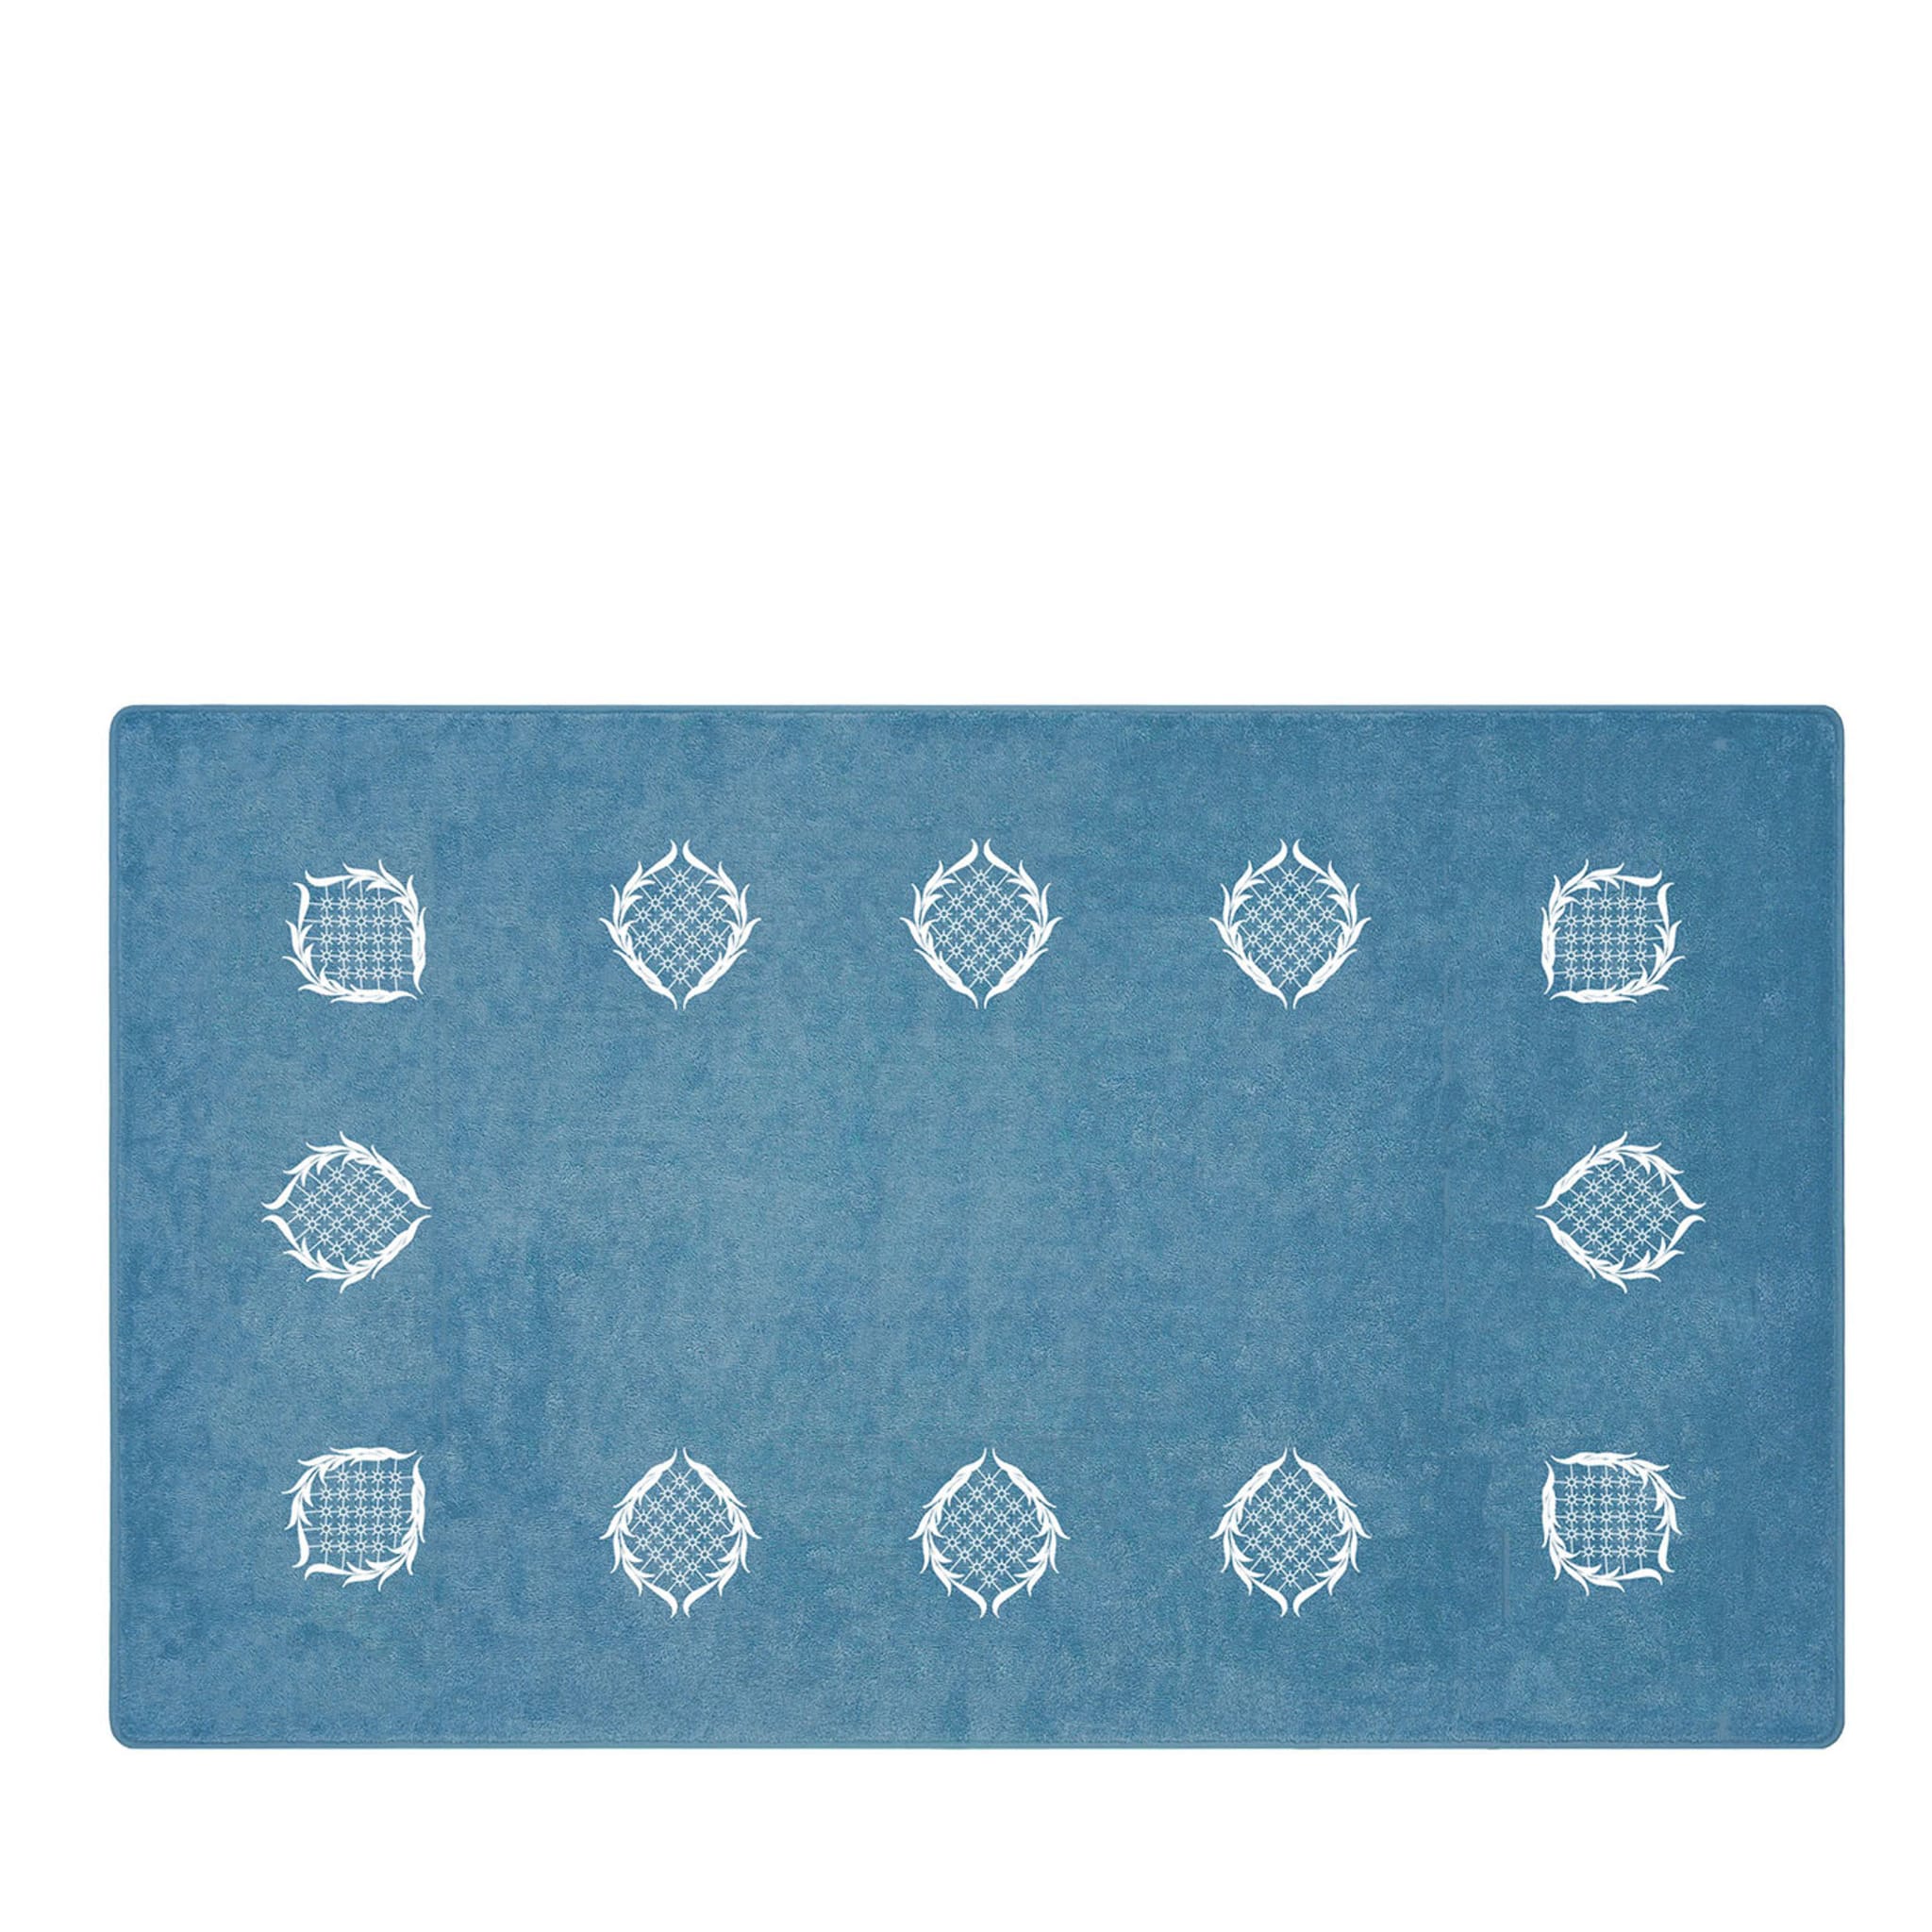 Ananas Embroidery Assisi Blue & White Bath Mat - Main view